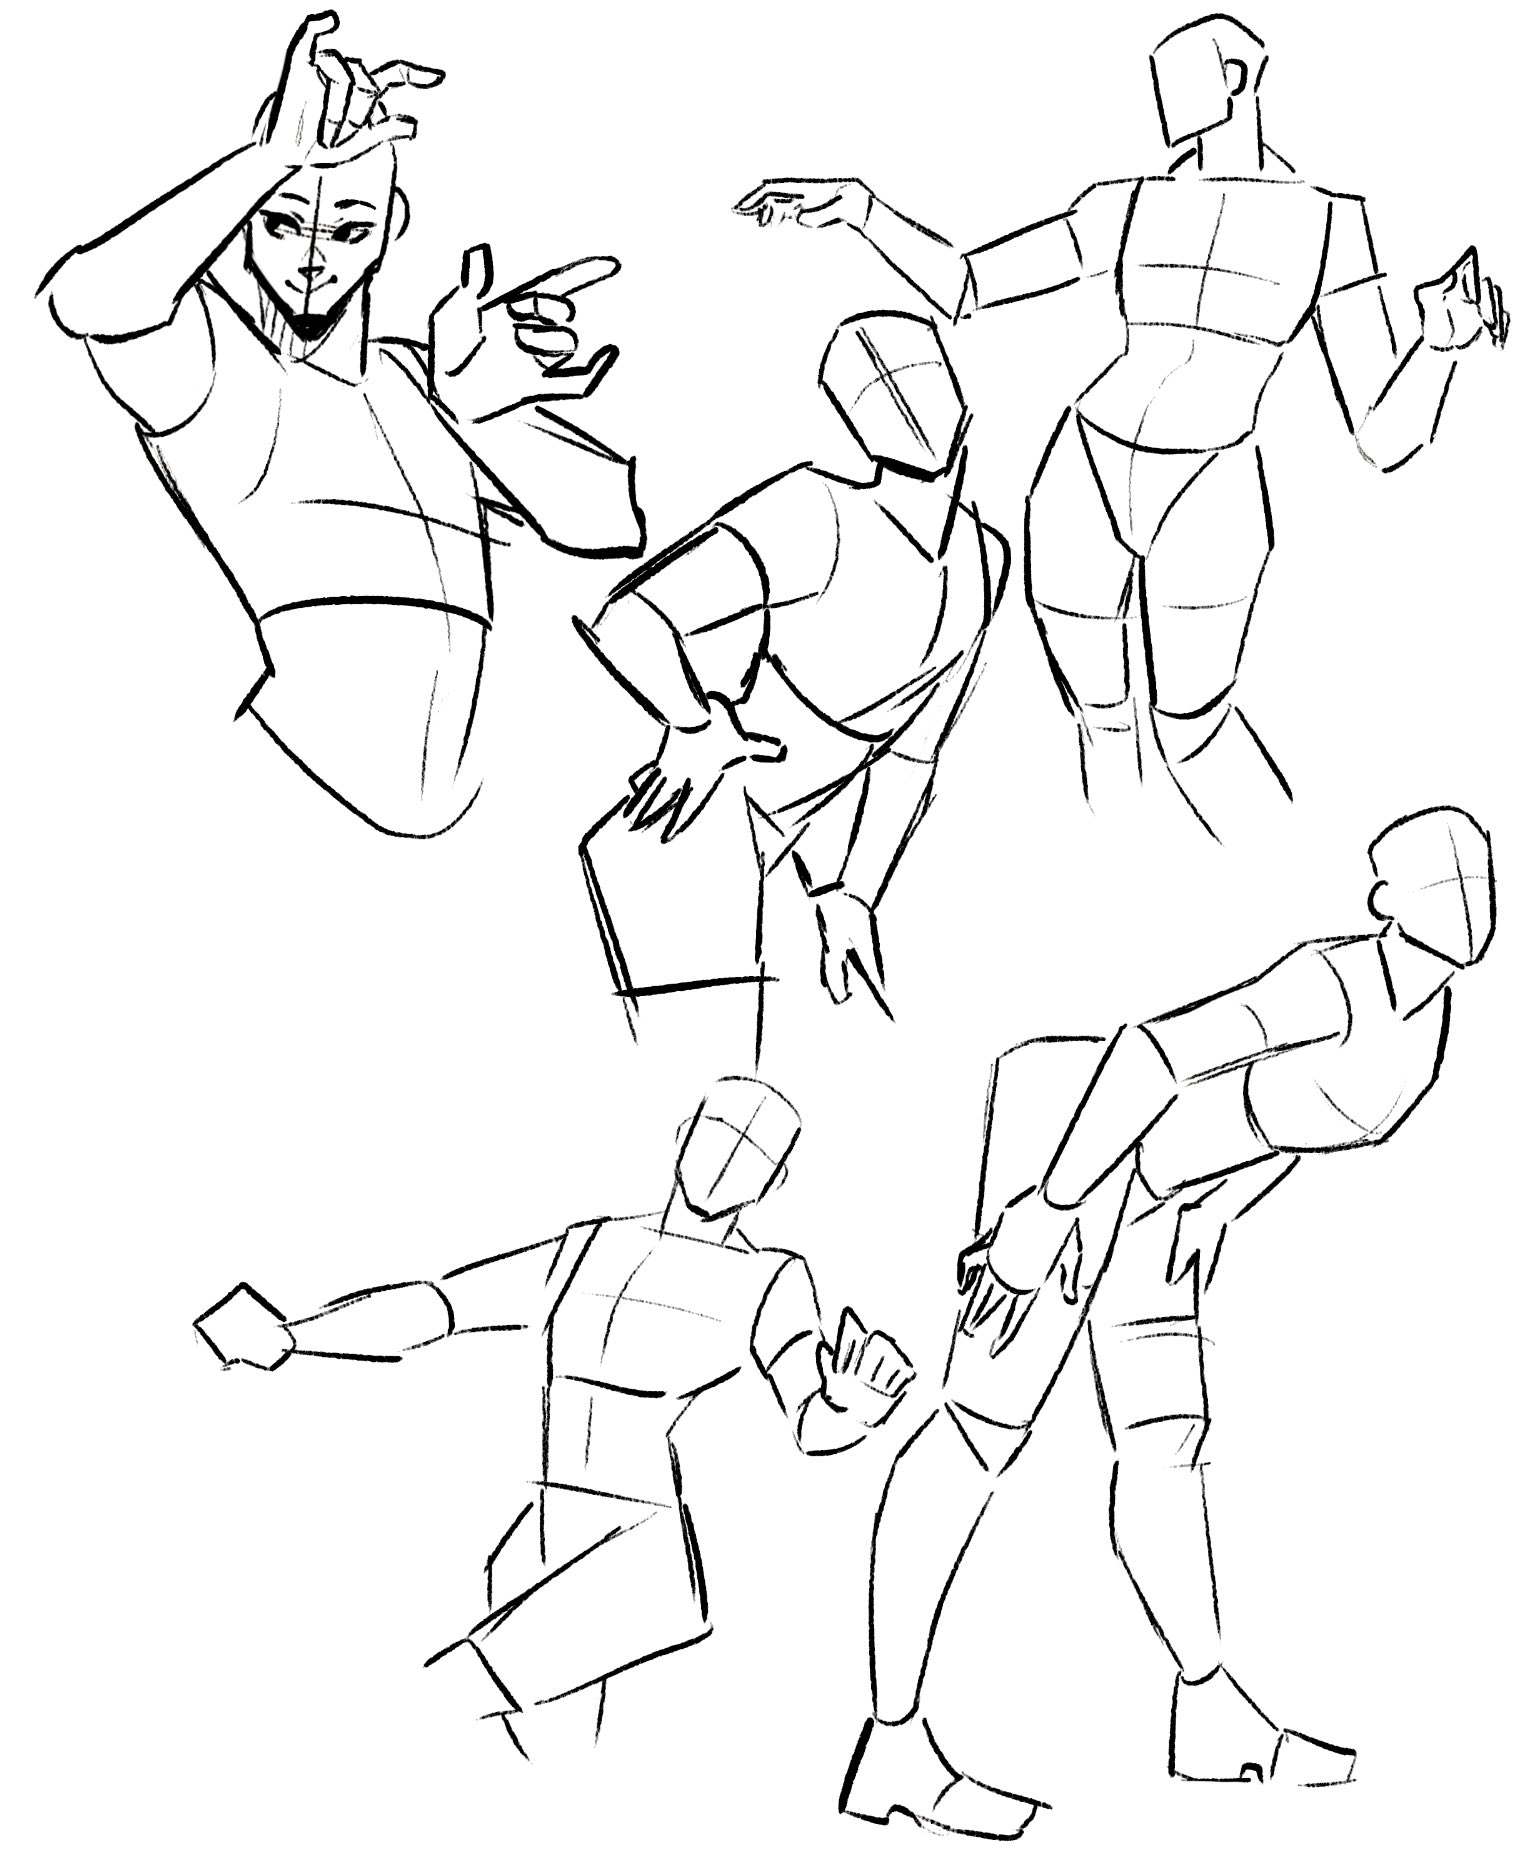 Action Pose Sketches by spacecaadet on DeviantArt